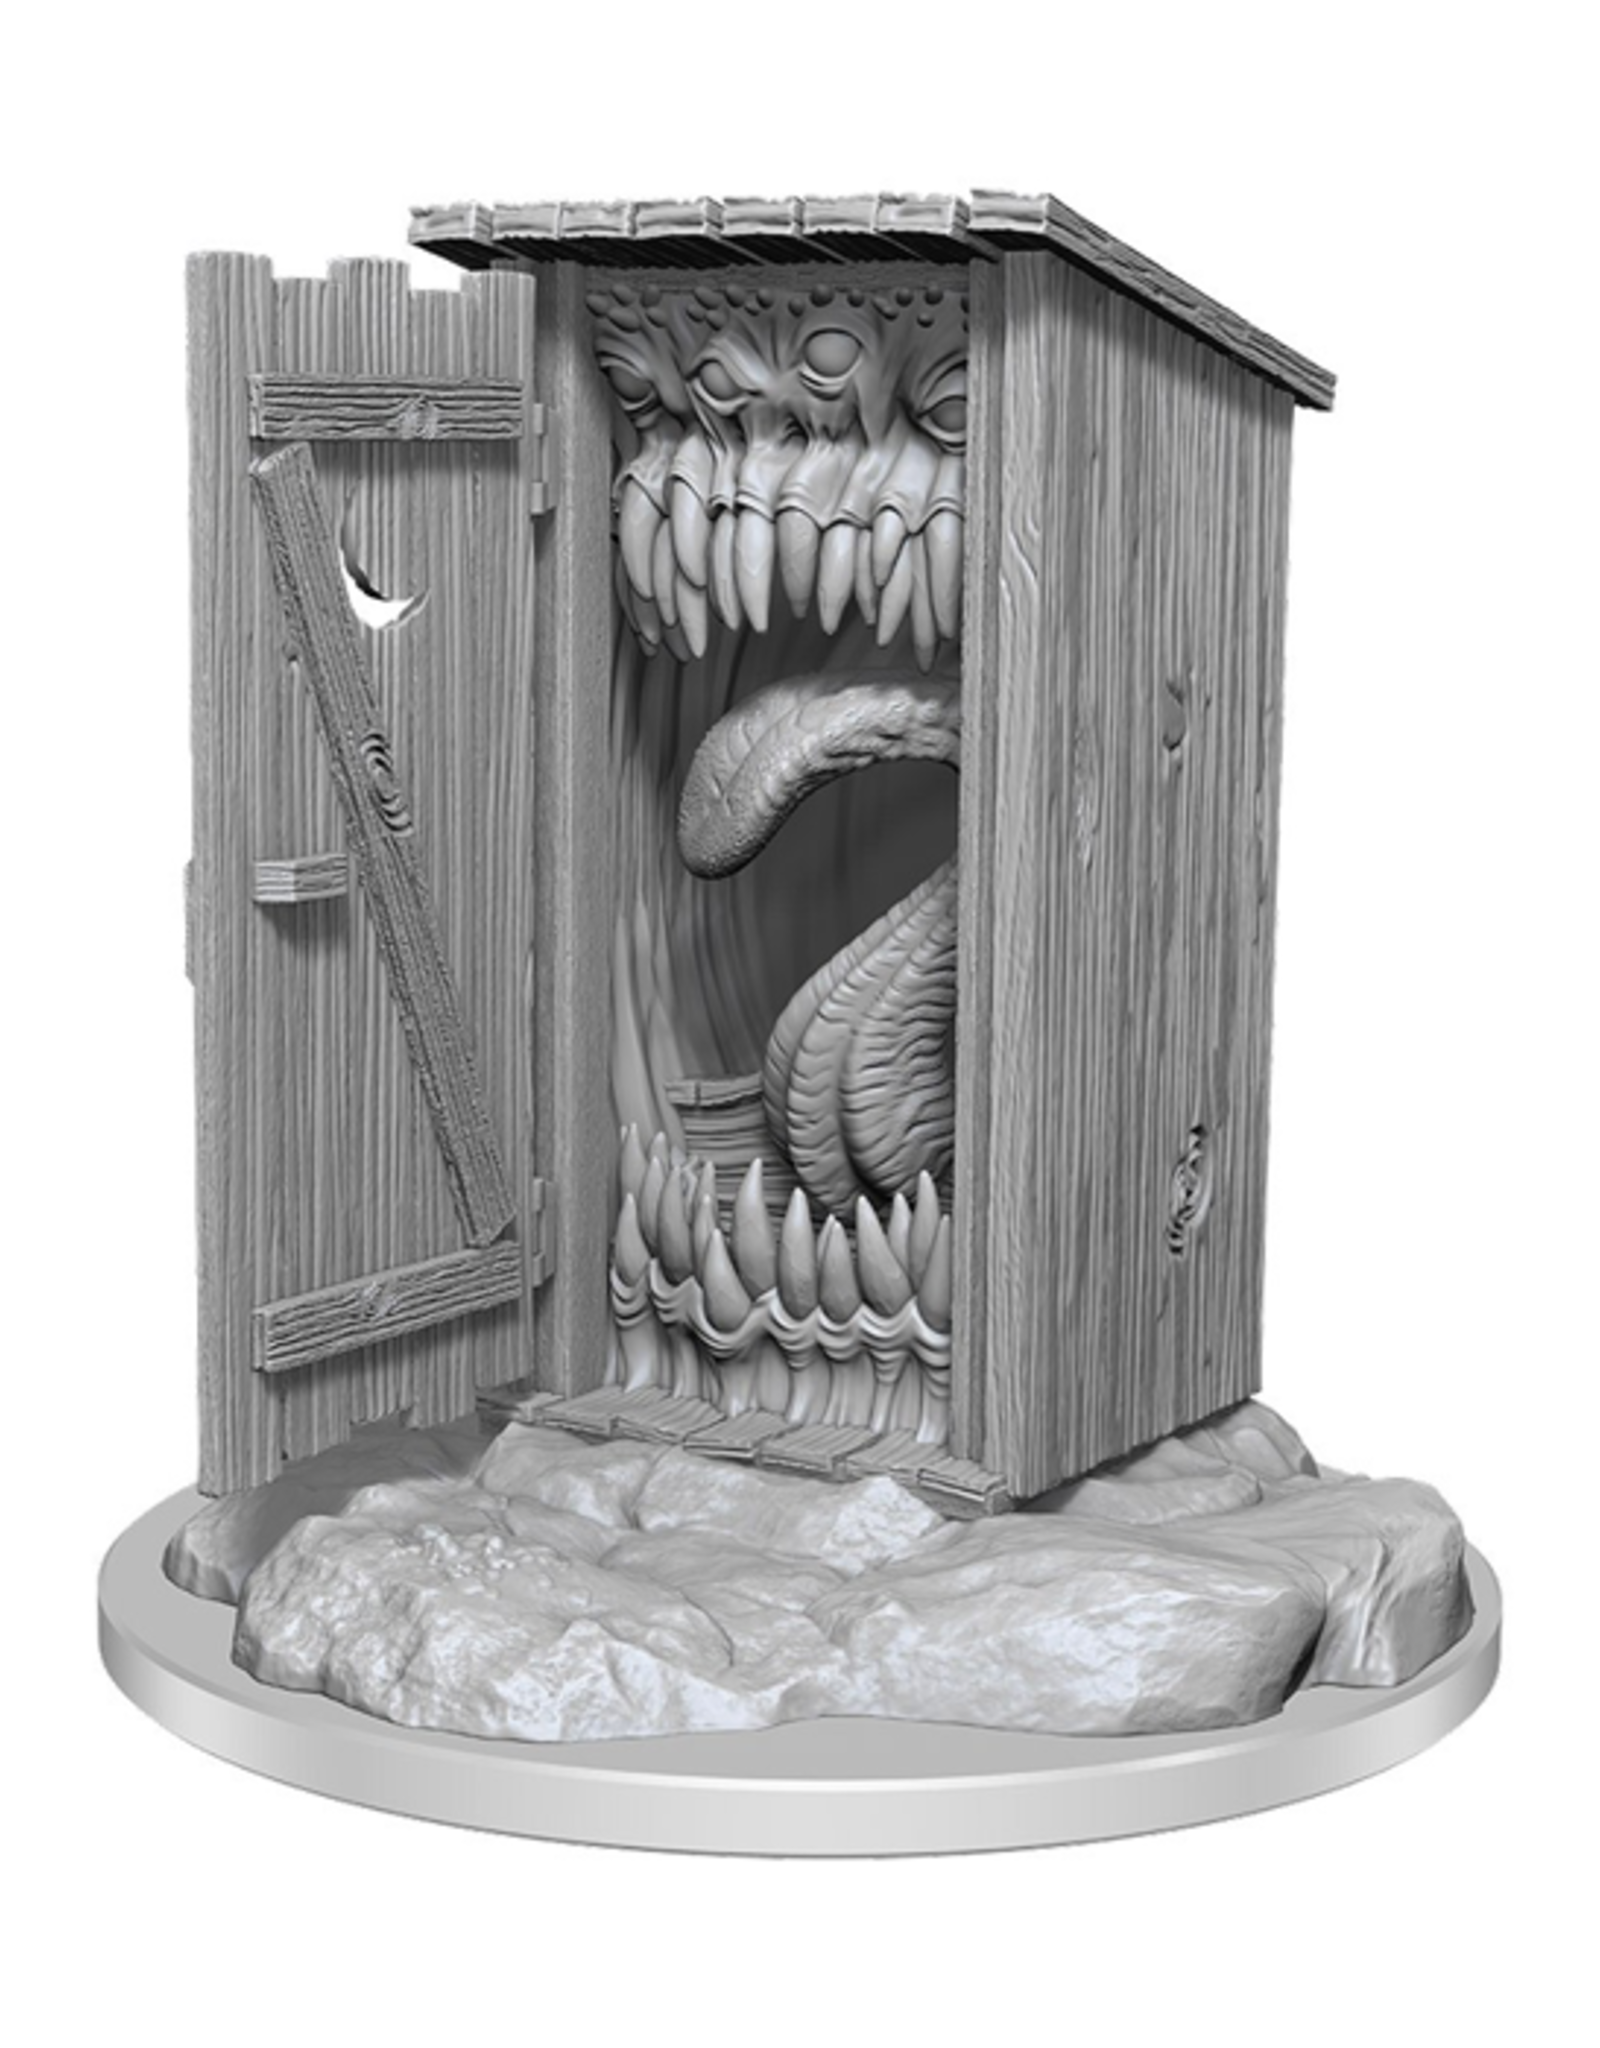 Dungeons & Dragons Dungeons & Dragons: Nolzur's - Giant Mimic